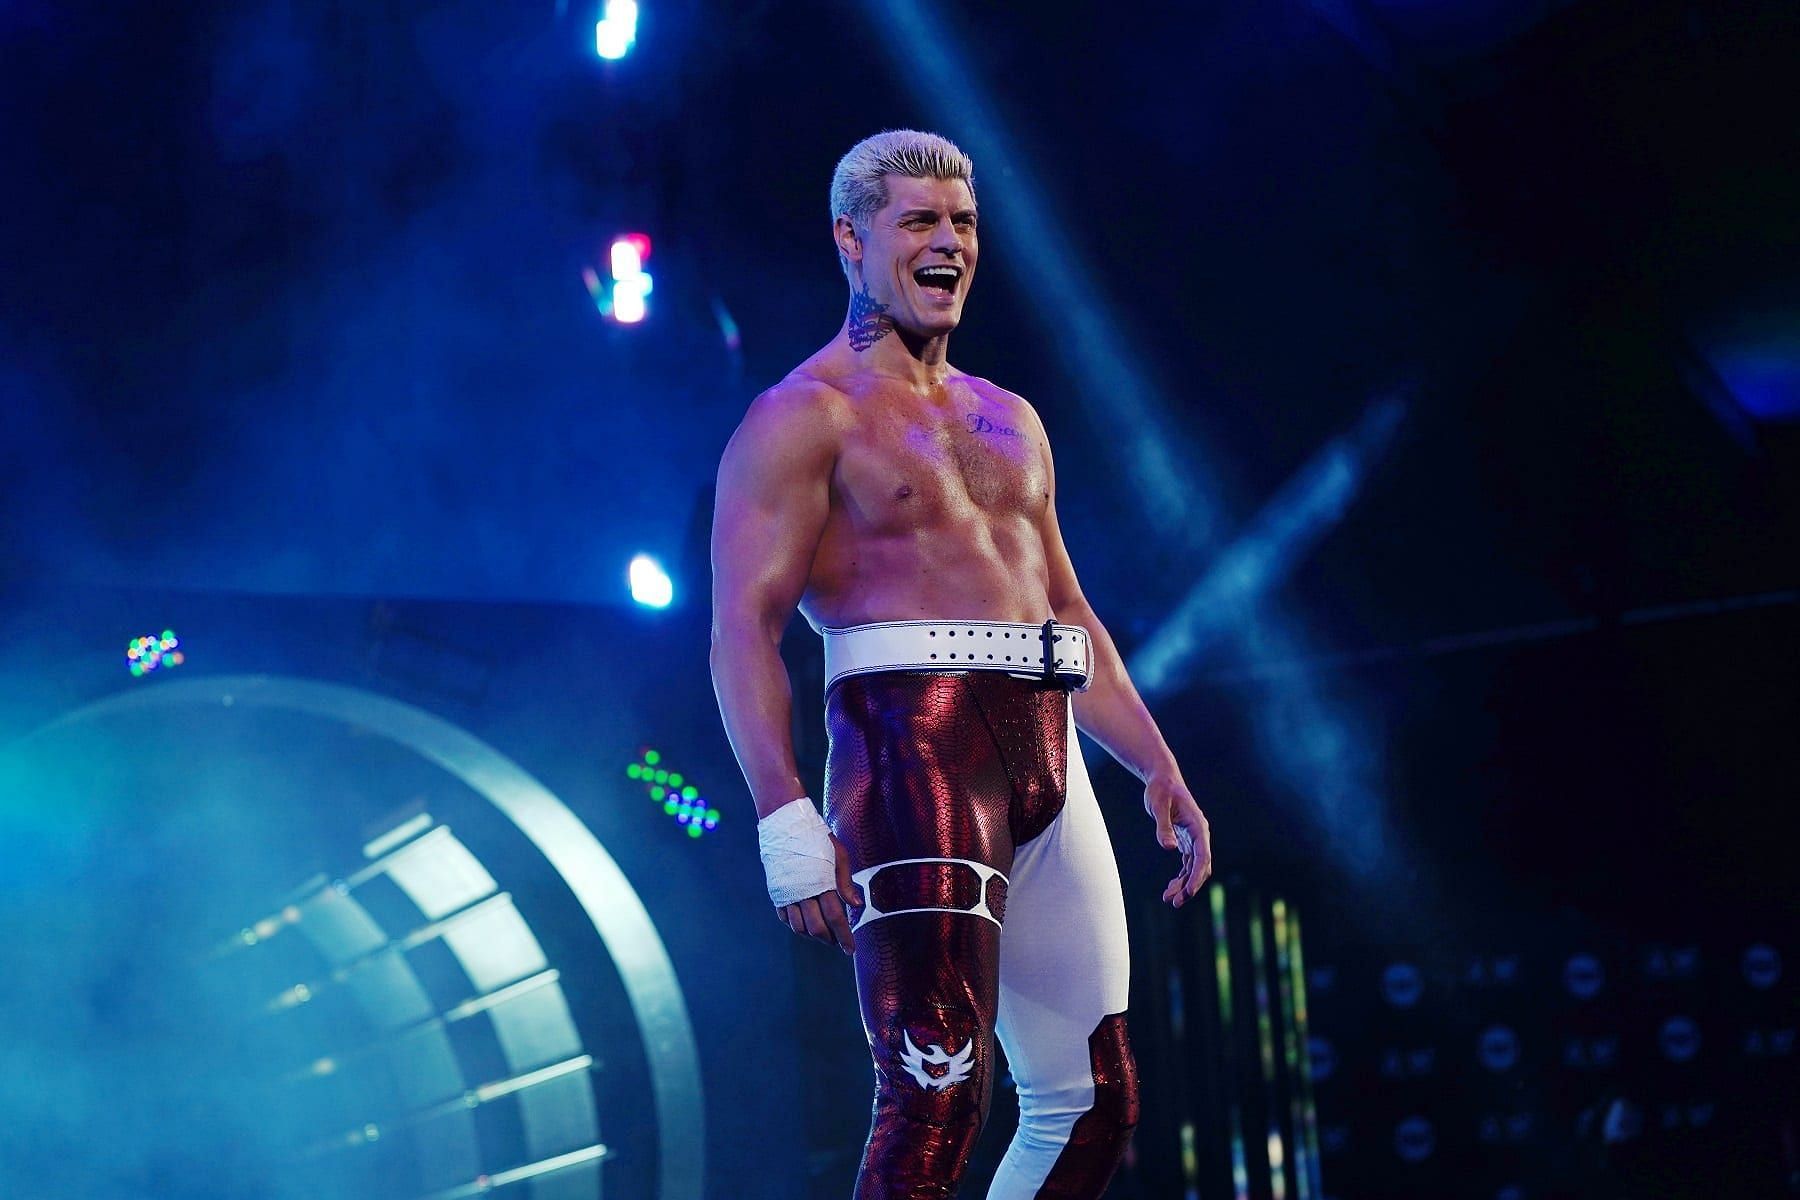 Cody Rhodes recently defeated Malakai Black in a match that proved divisive amongst the AEW fans.